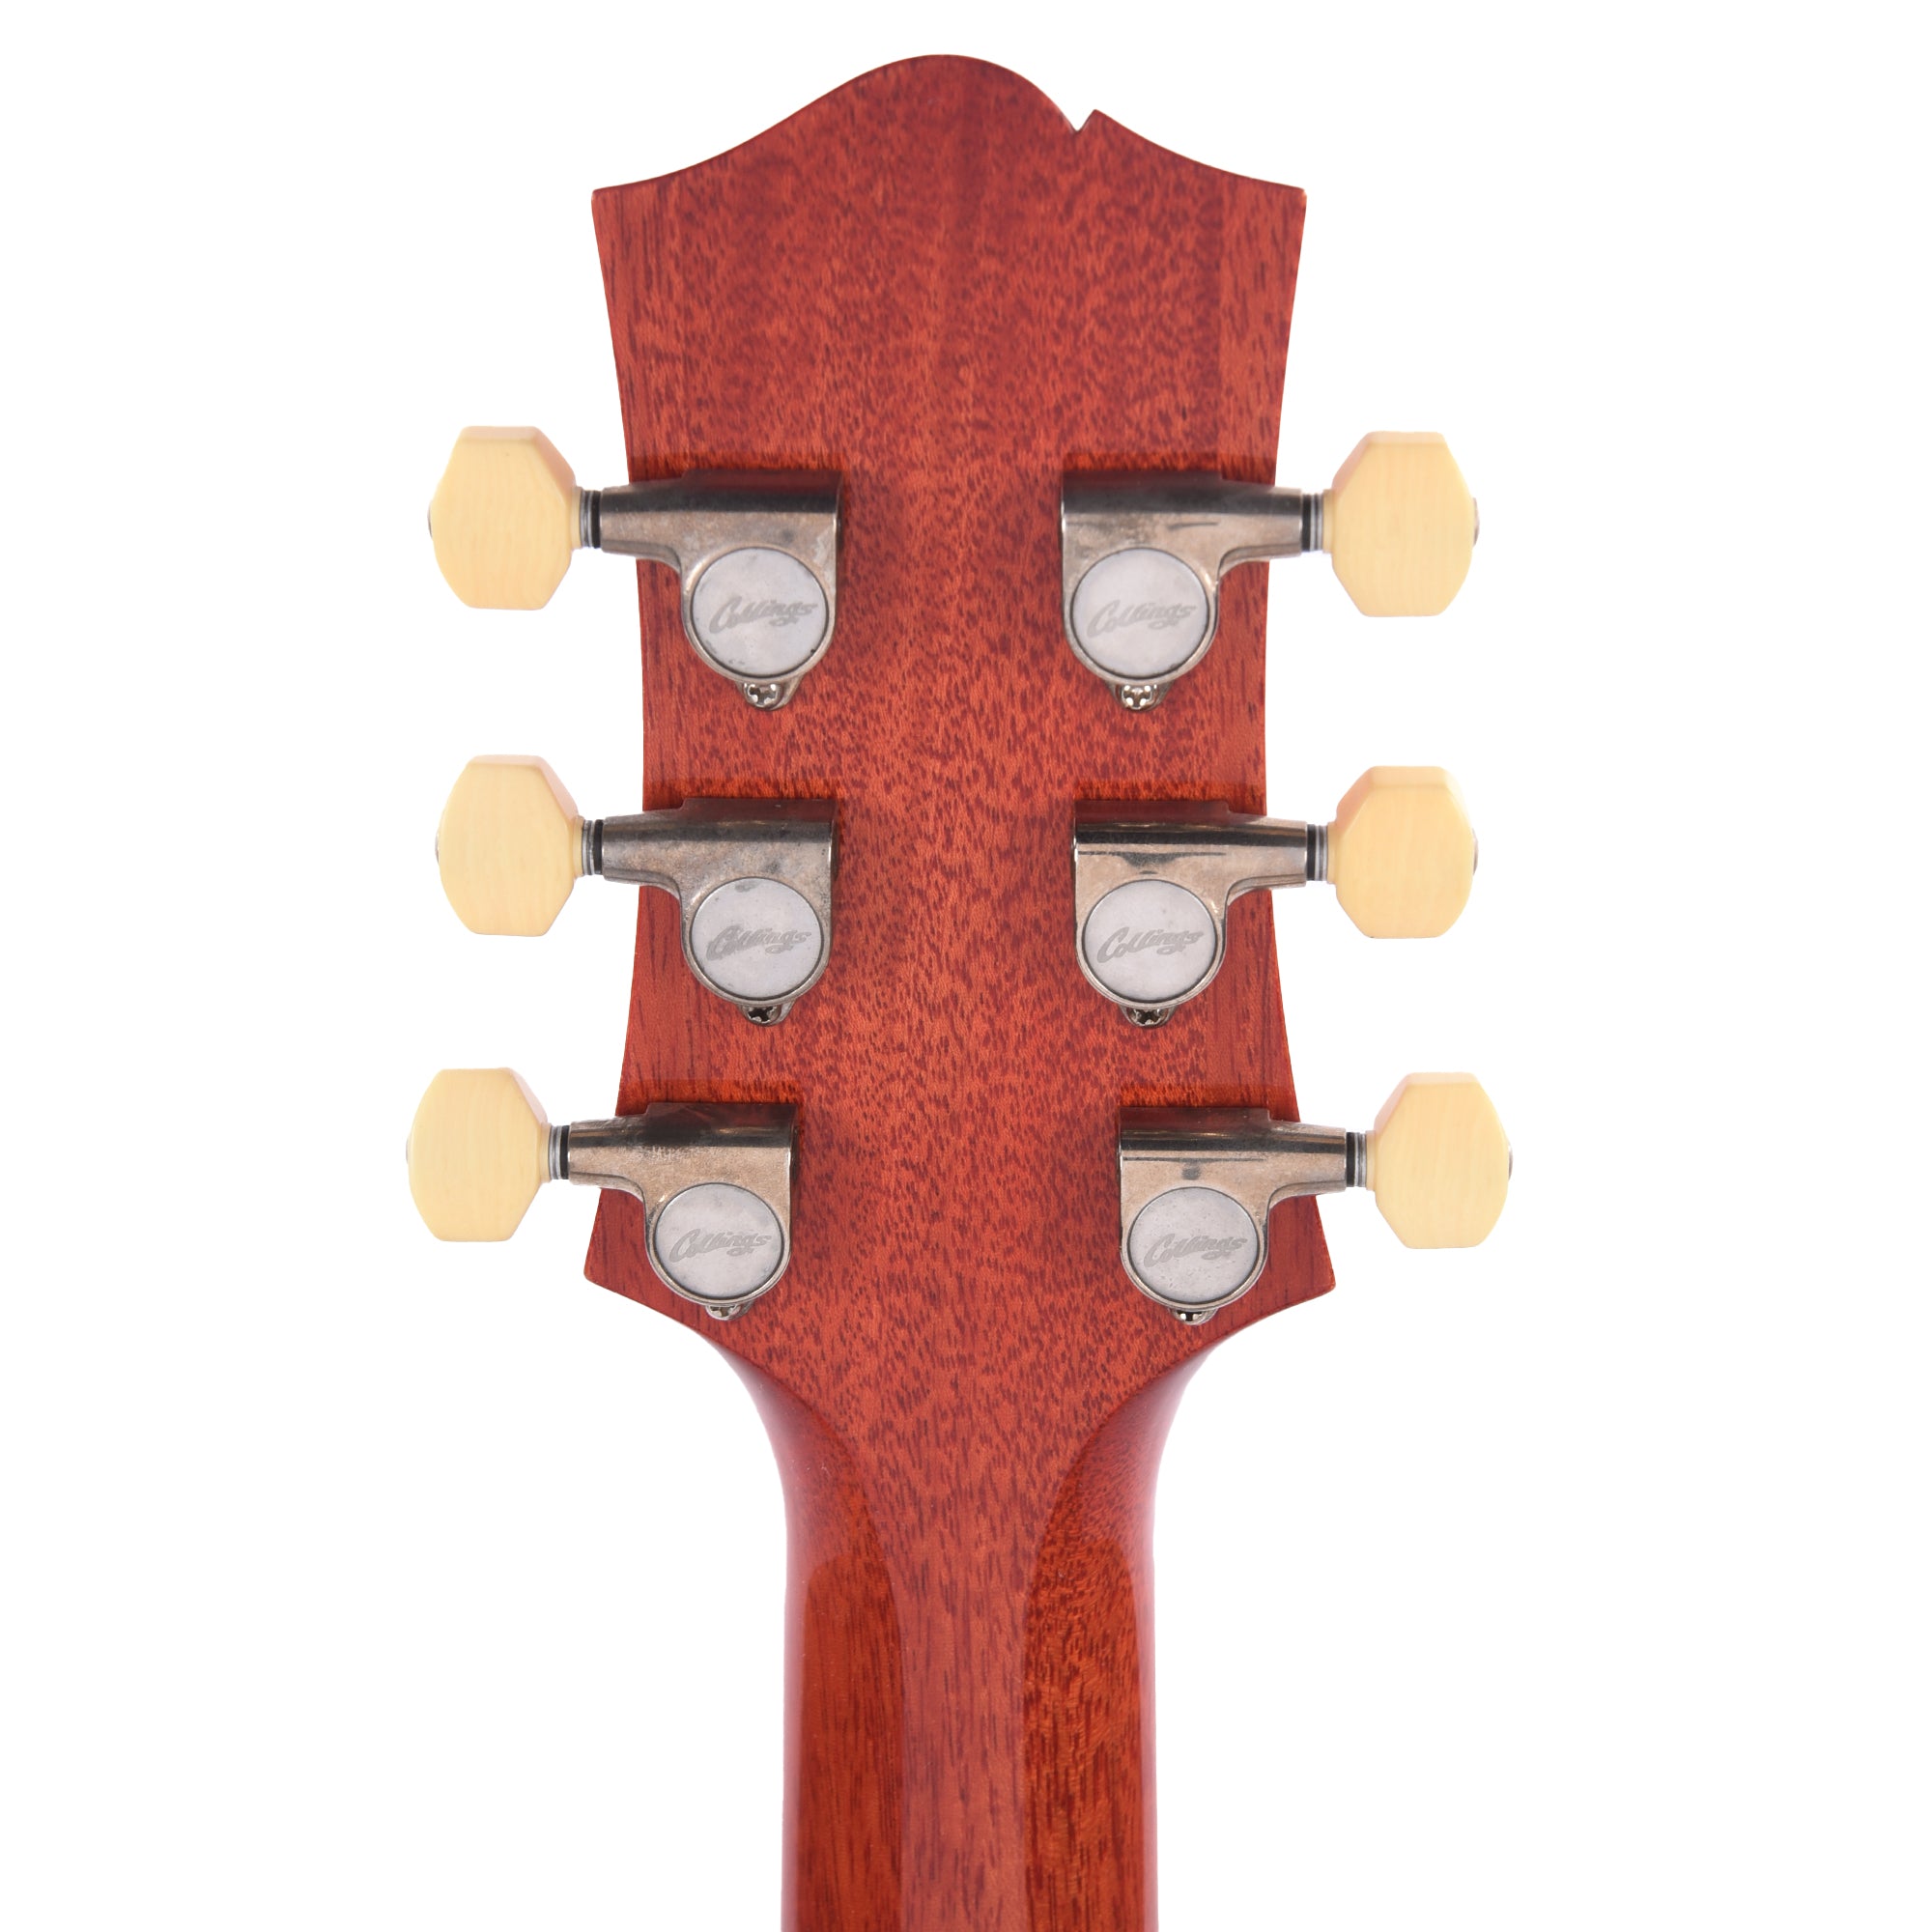 Collings I-35 LC Vintage Aged Faded Cherry